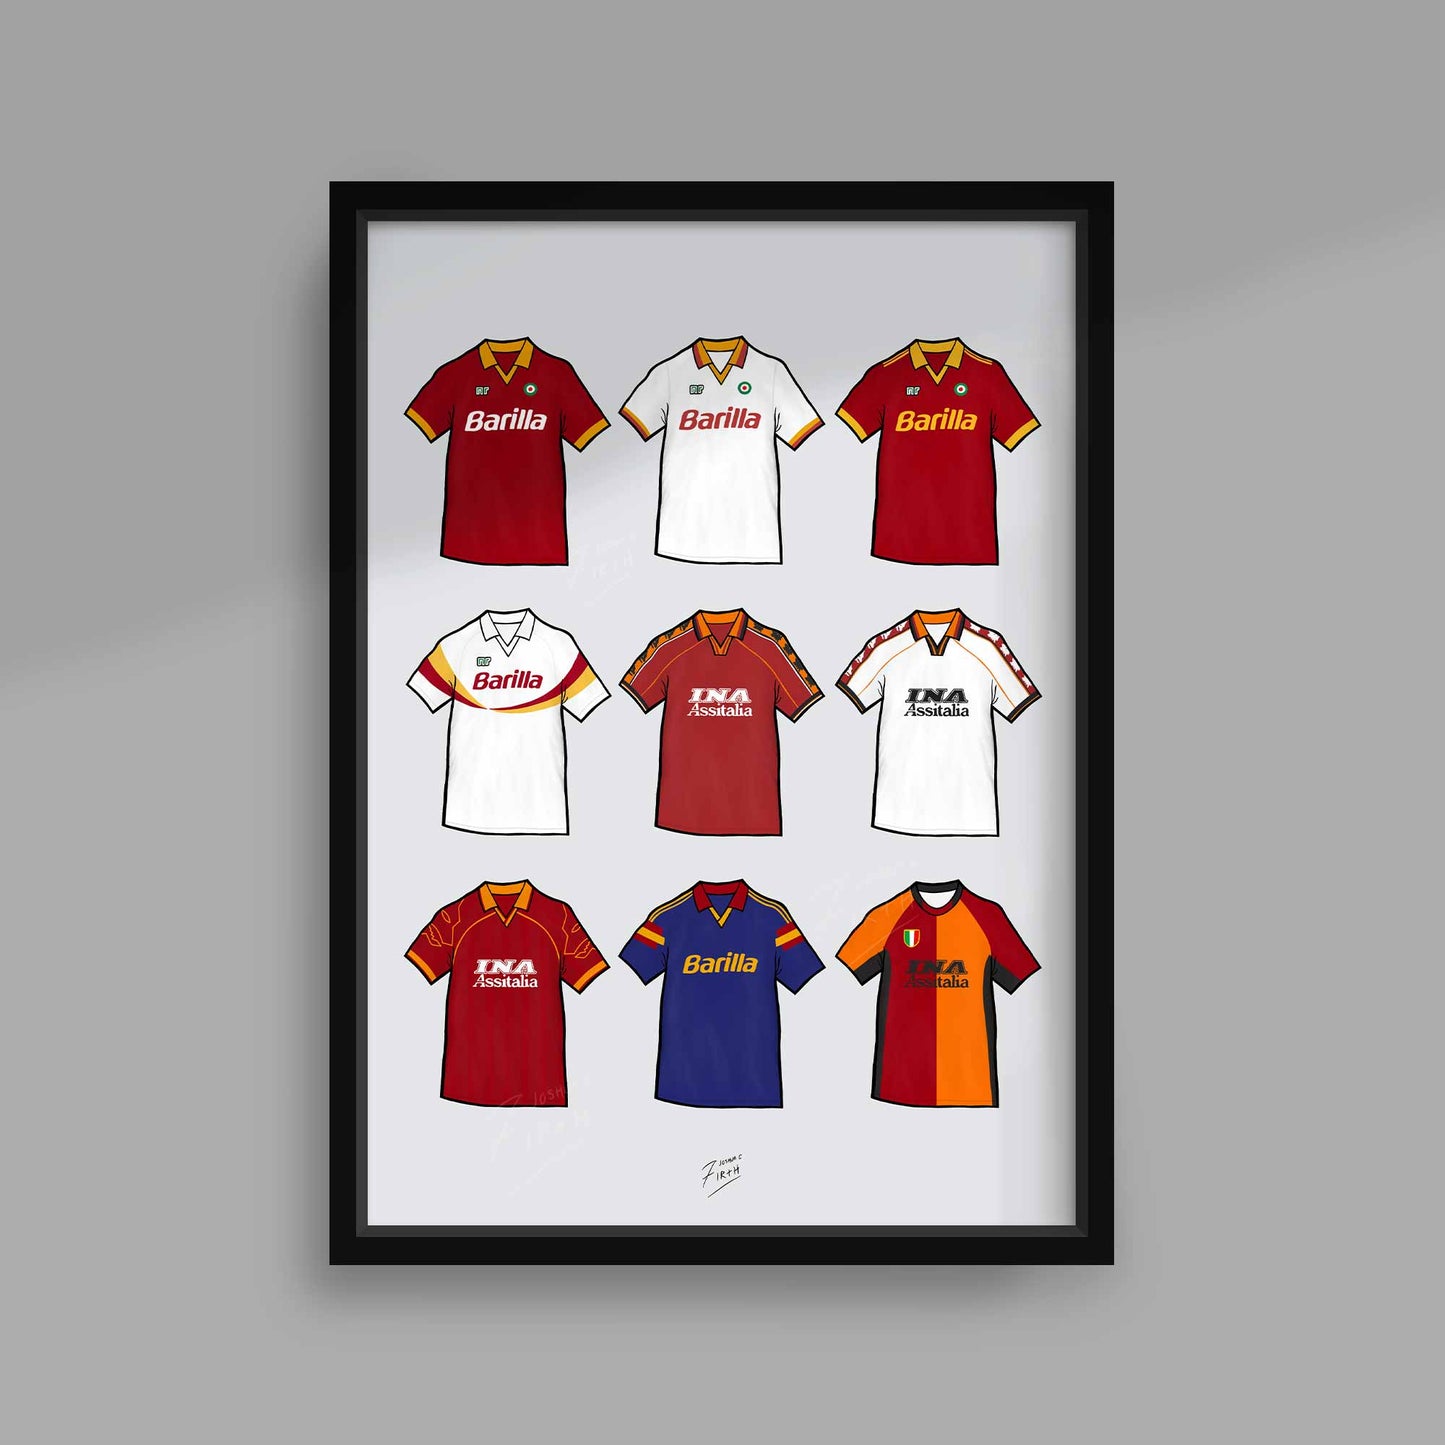 Celebrate AS Roma's iconic vintage shirts with this poster print artwork. Featuring retro designs that capture the essence of the club's history